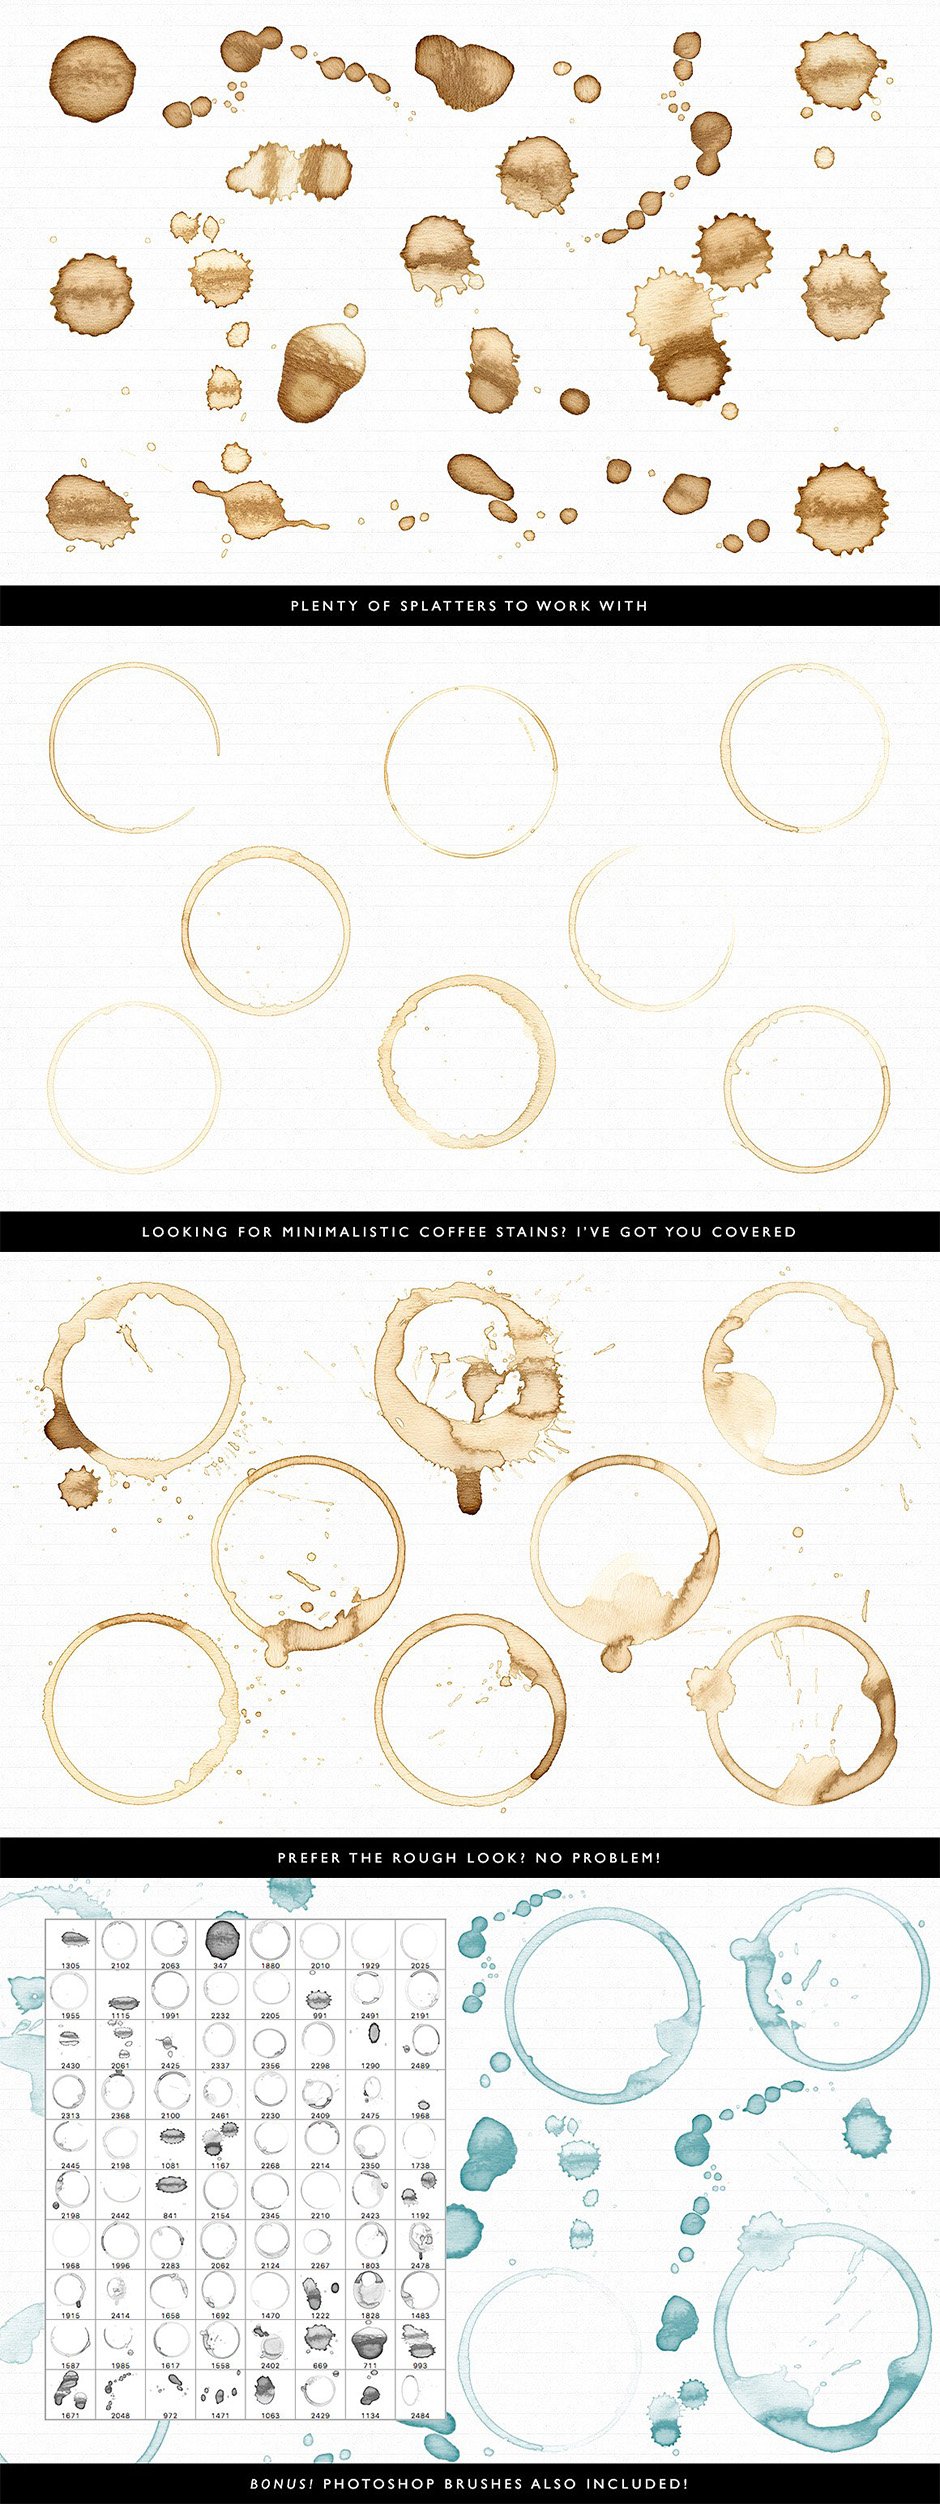 80 Coffee Stains, Rings and Splatters